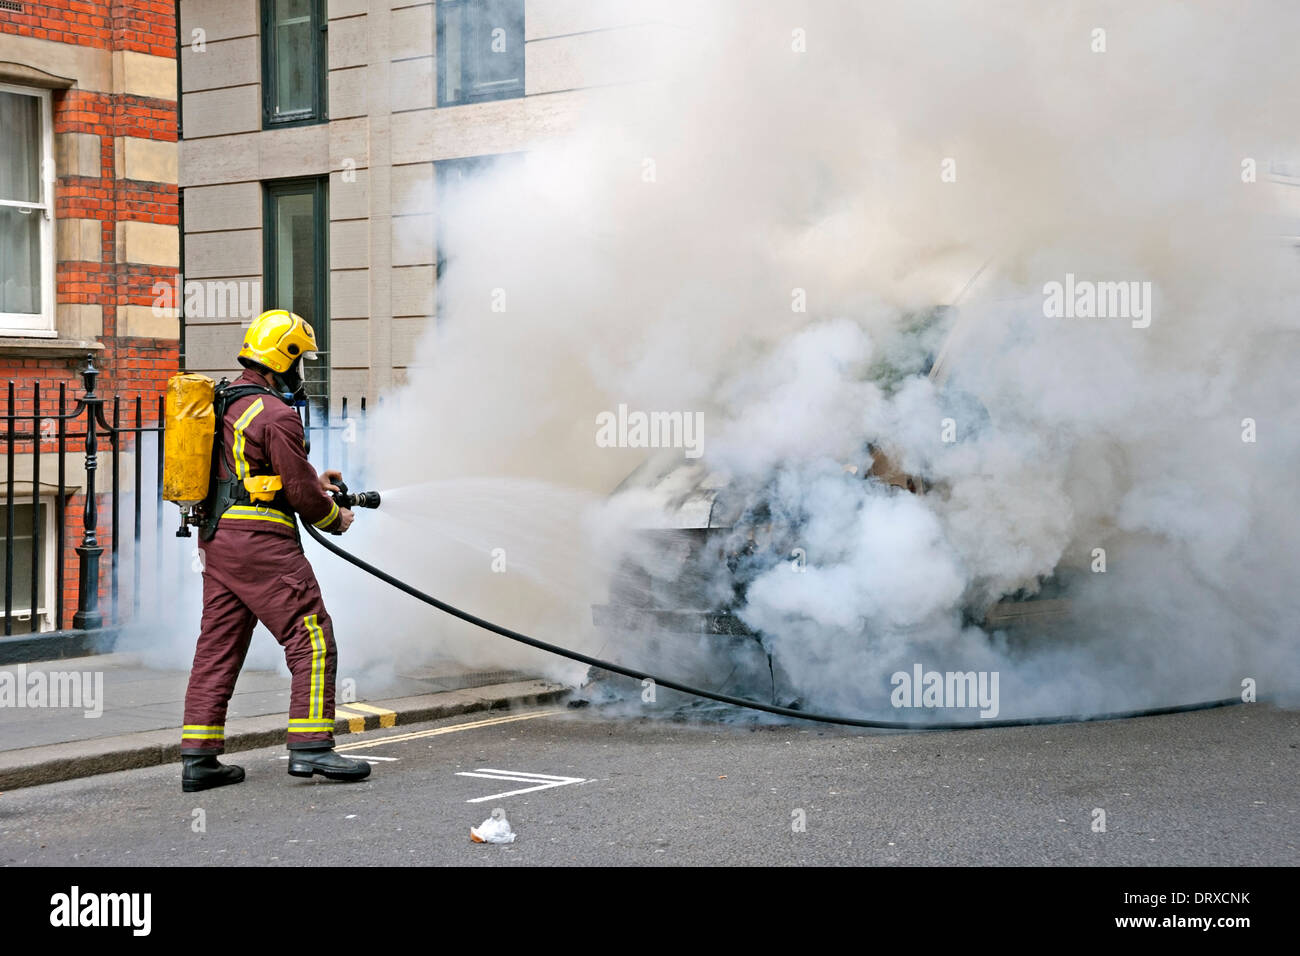 Fireman tackles a fire on a van in a London Street Stock Photo